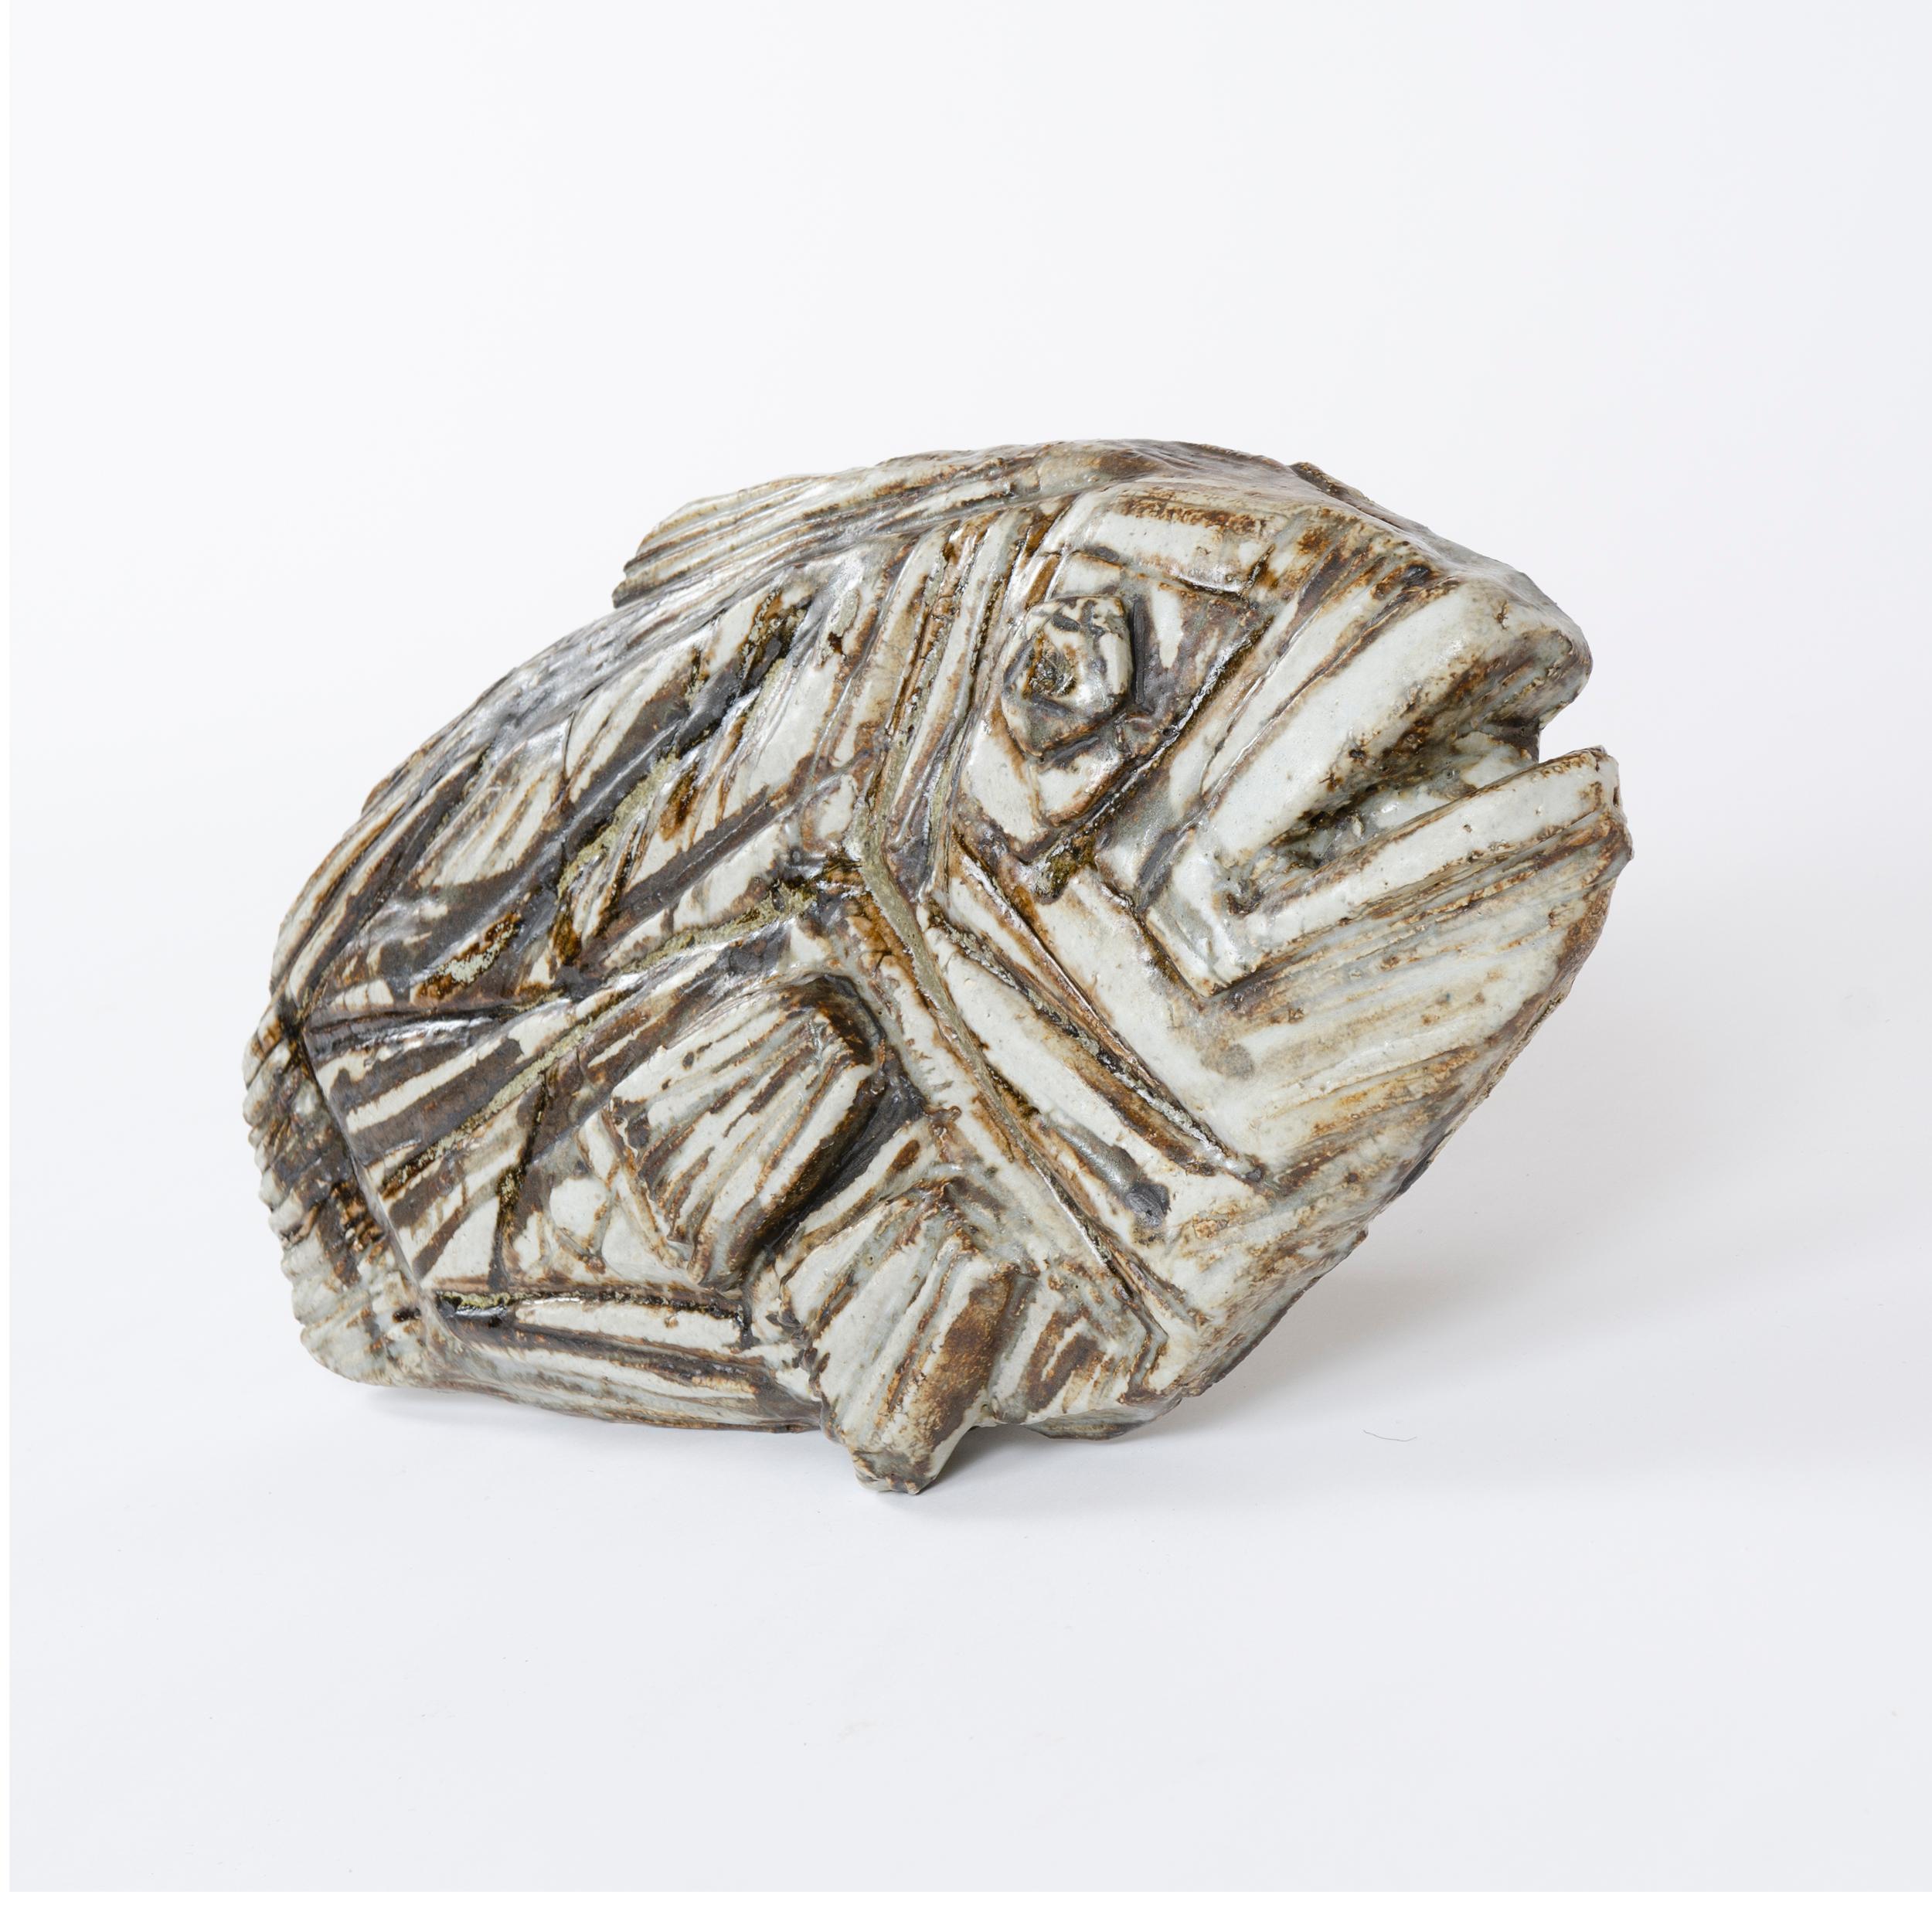 A substantial stoneware sculpture of a fossilized flatfish having a rich and variegated matte glaze over expressive textural impressions enriched by brown underglaze markings. Signed and stamped.